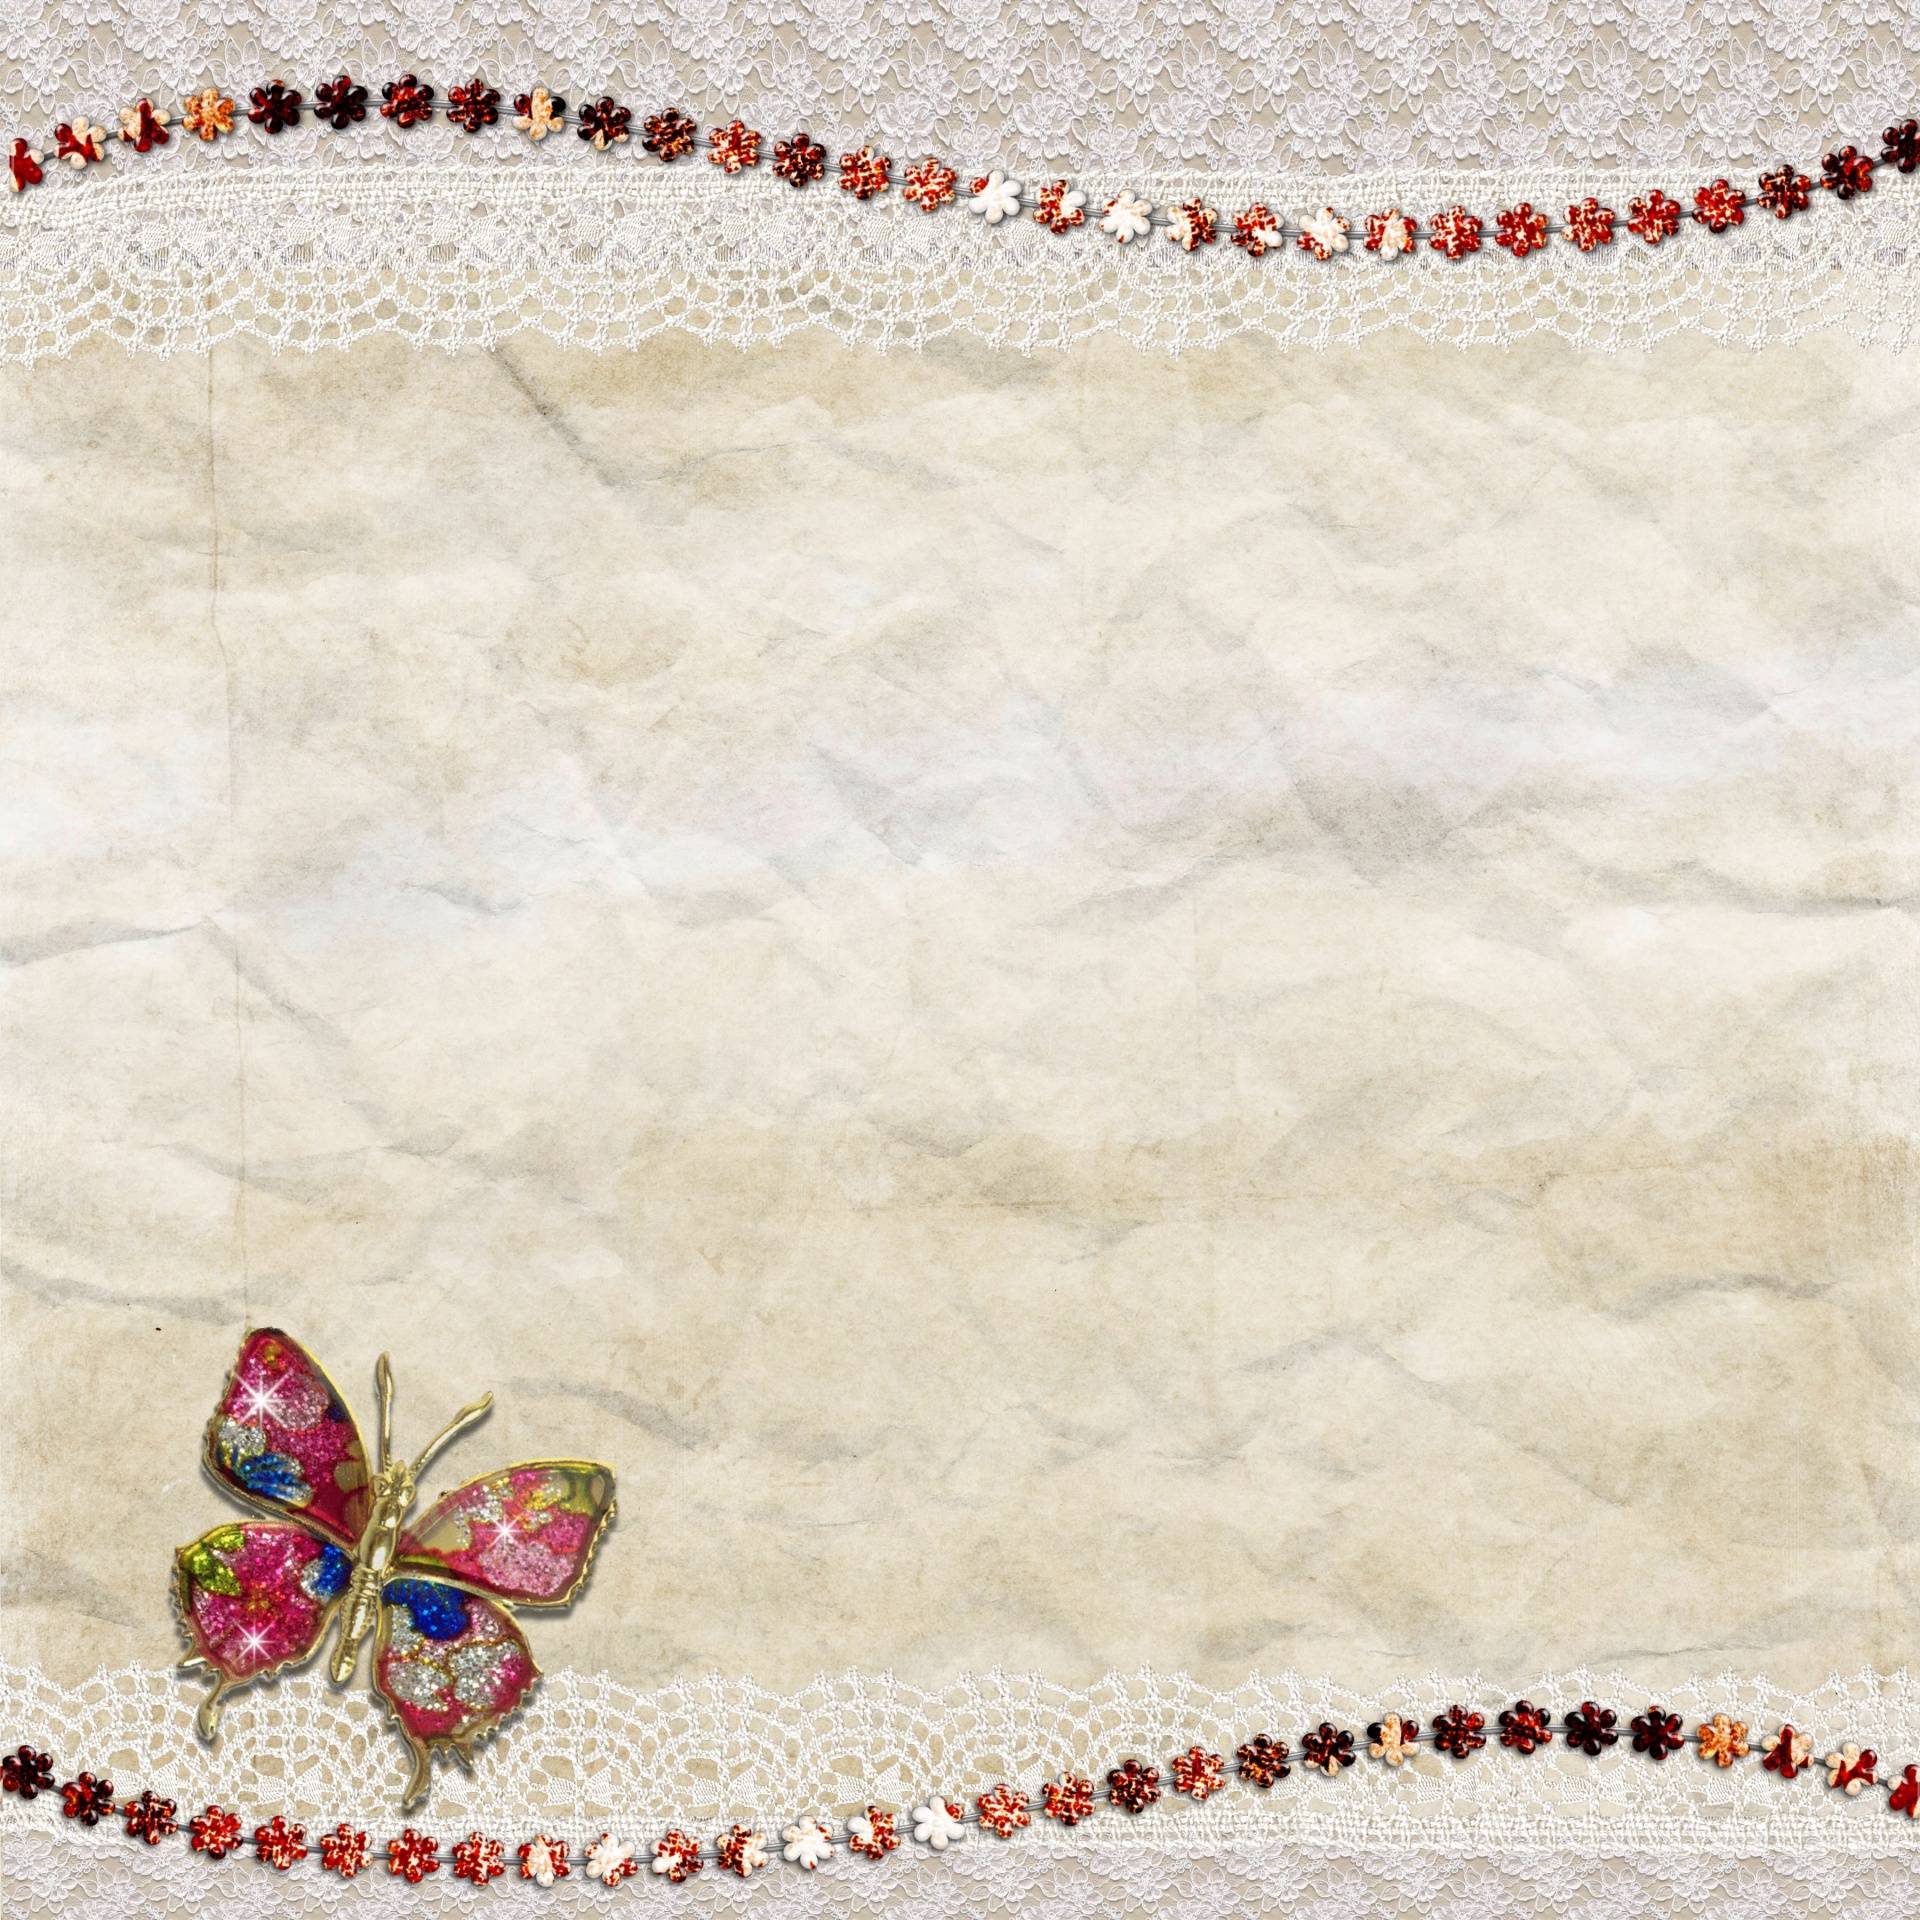 Background Scrapbook Butterfly Lace